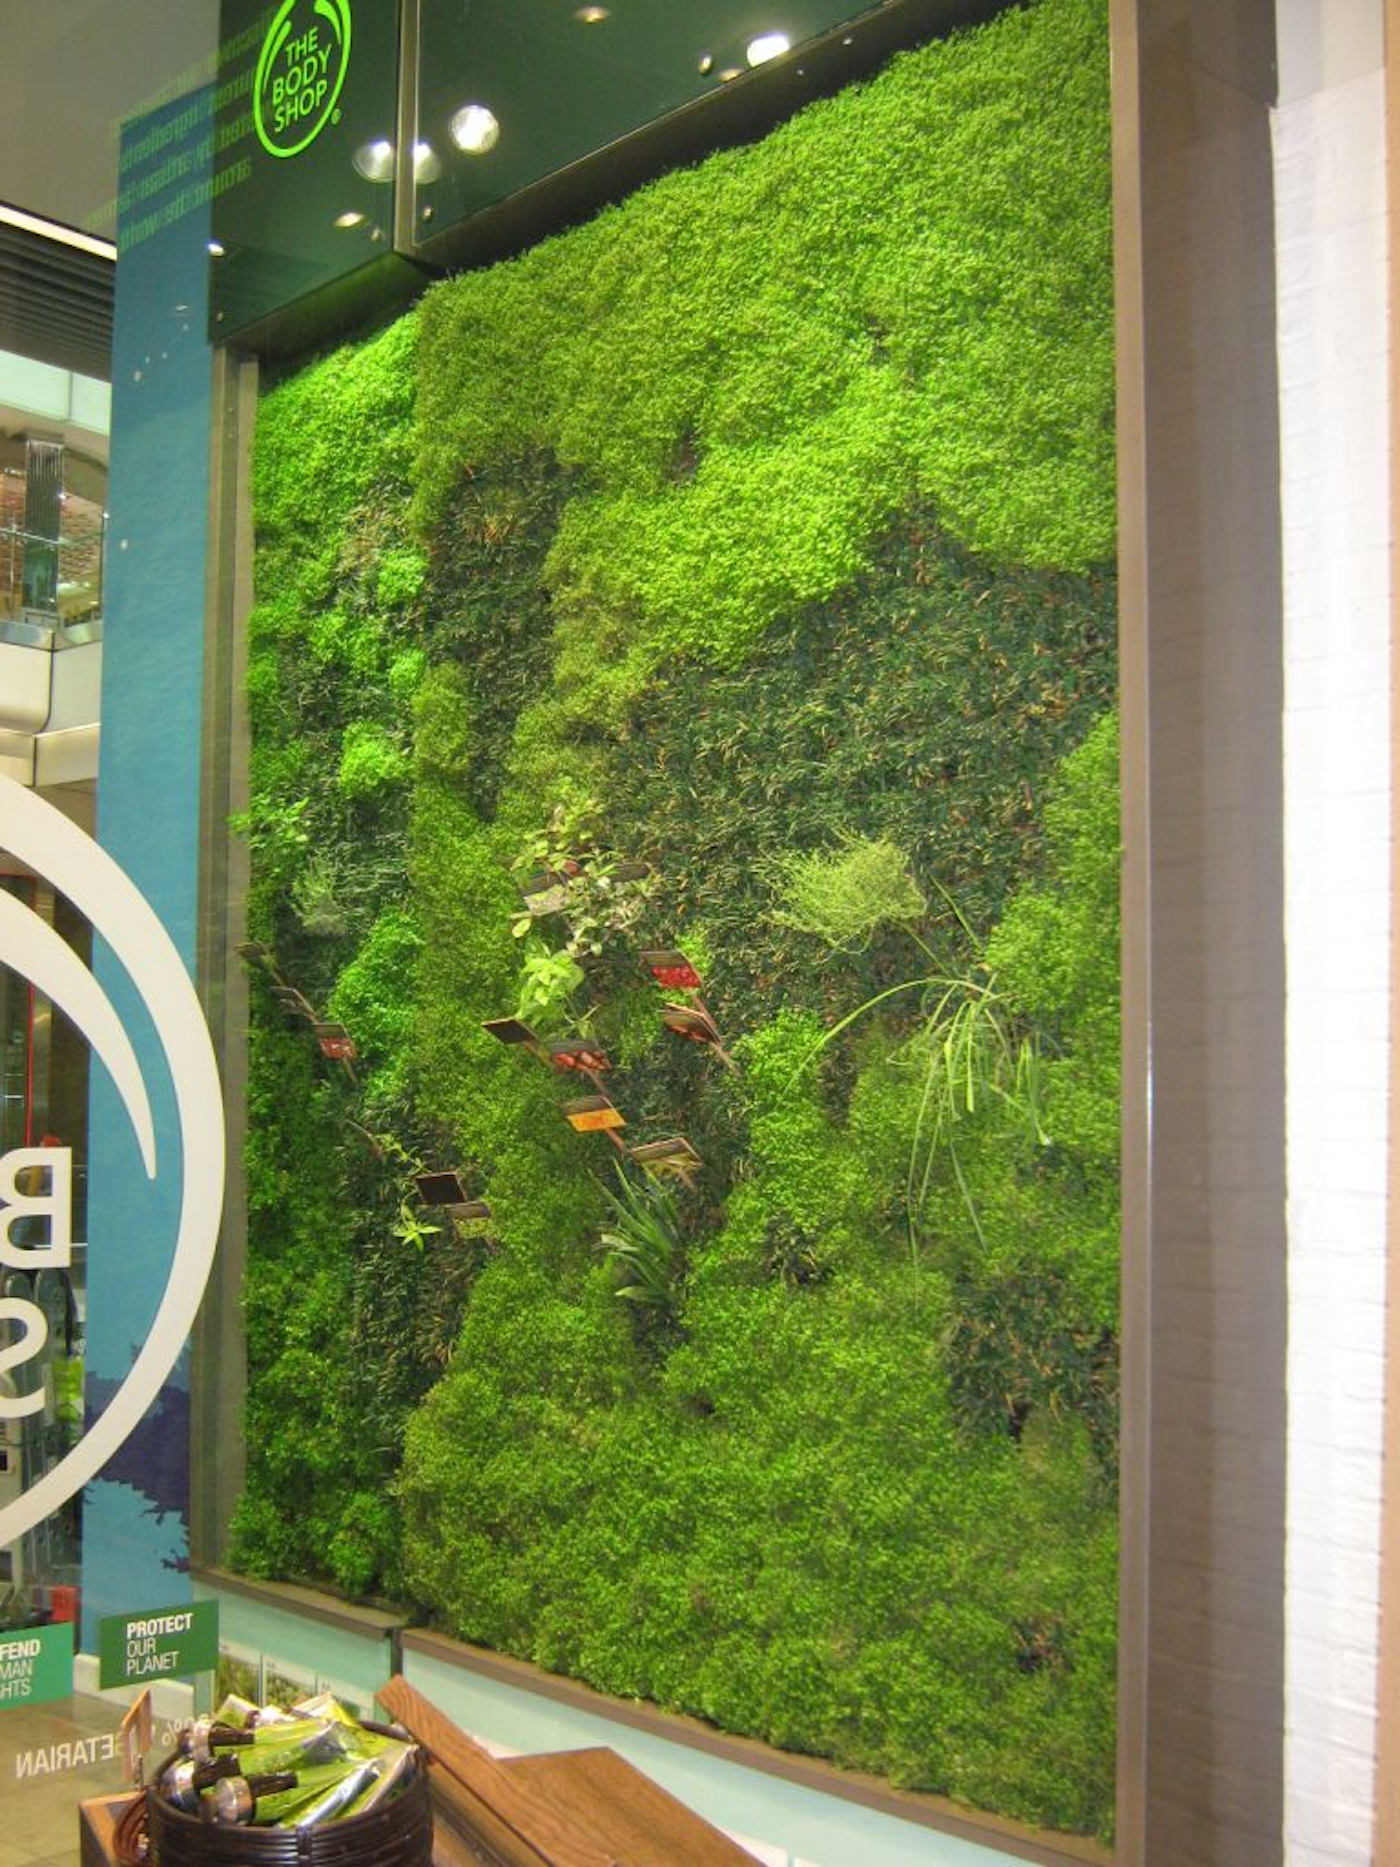 lush green mossy living wall in a retail store in a shopping mall